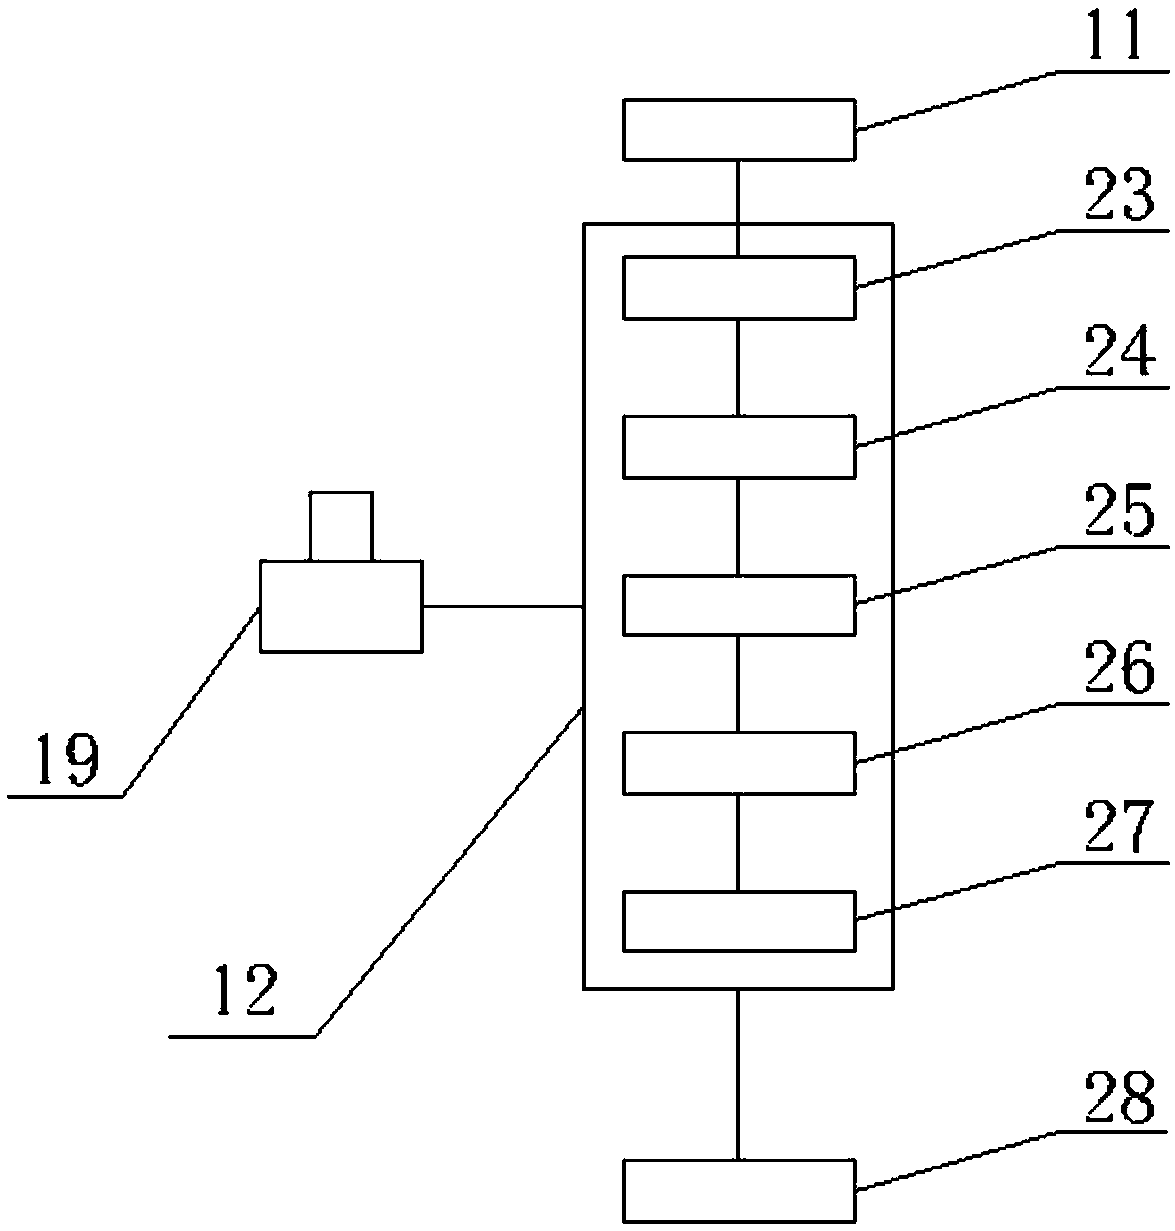 Anti-freeze rain gauge based on infrared distance measurement and control method